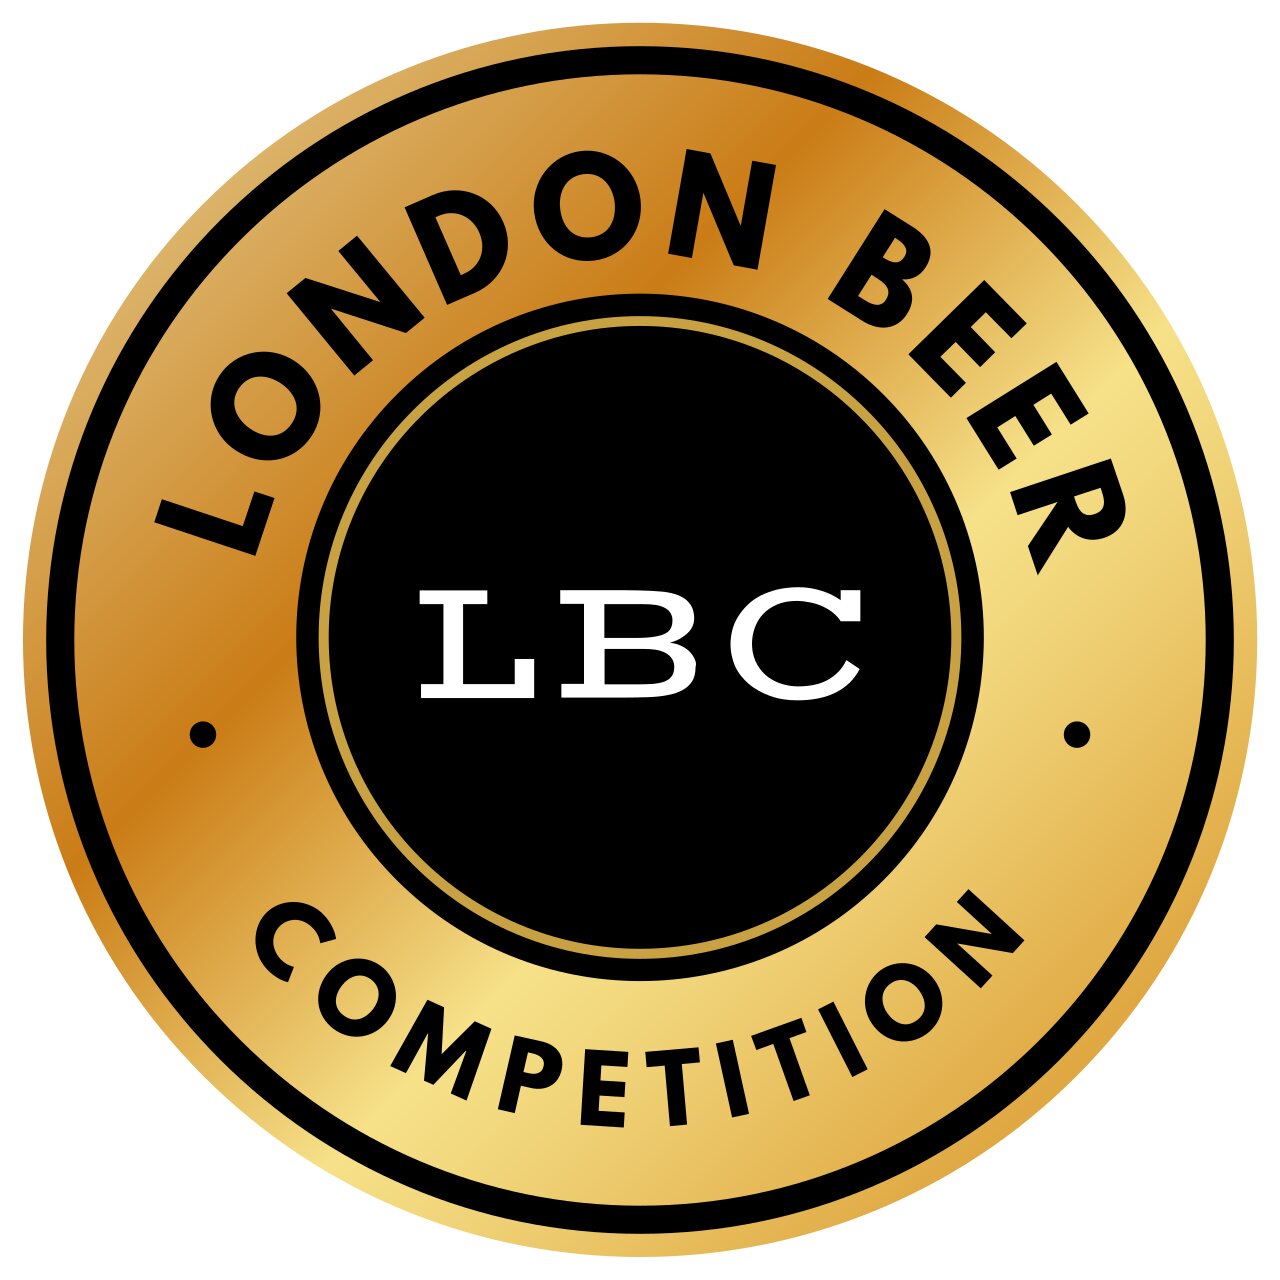 London Beer Competition Logo